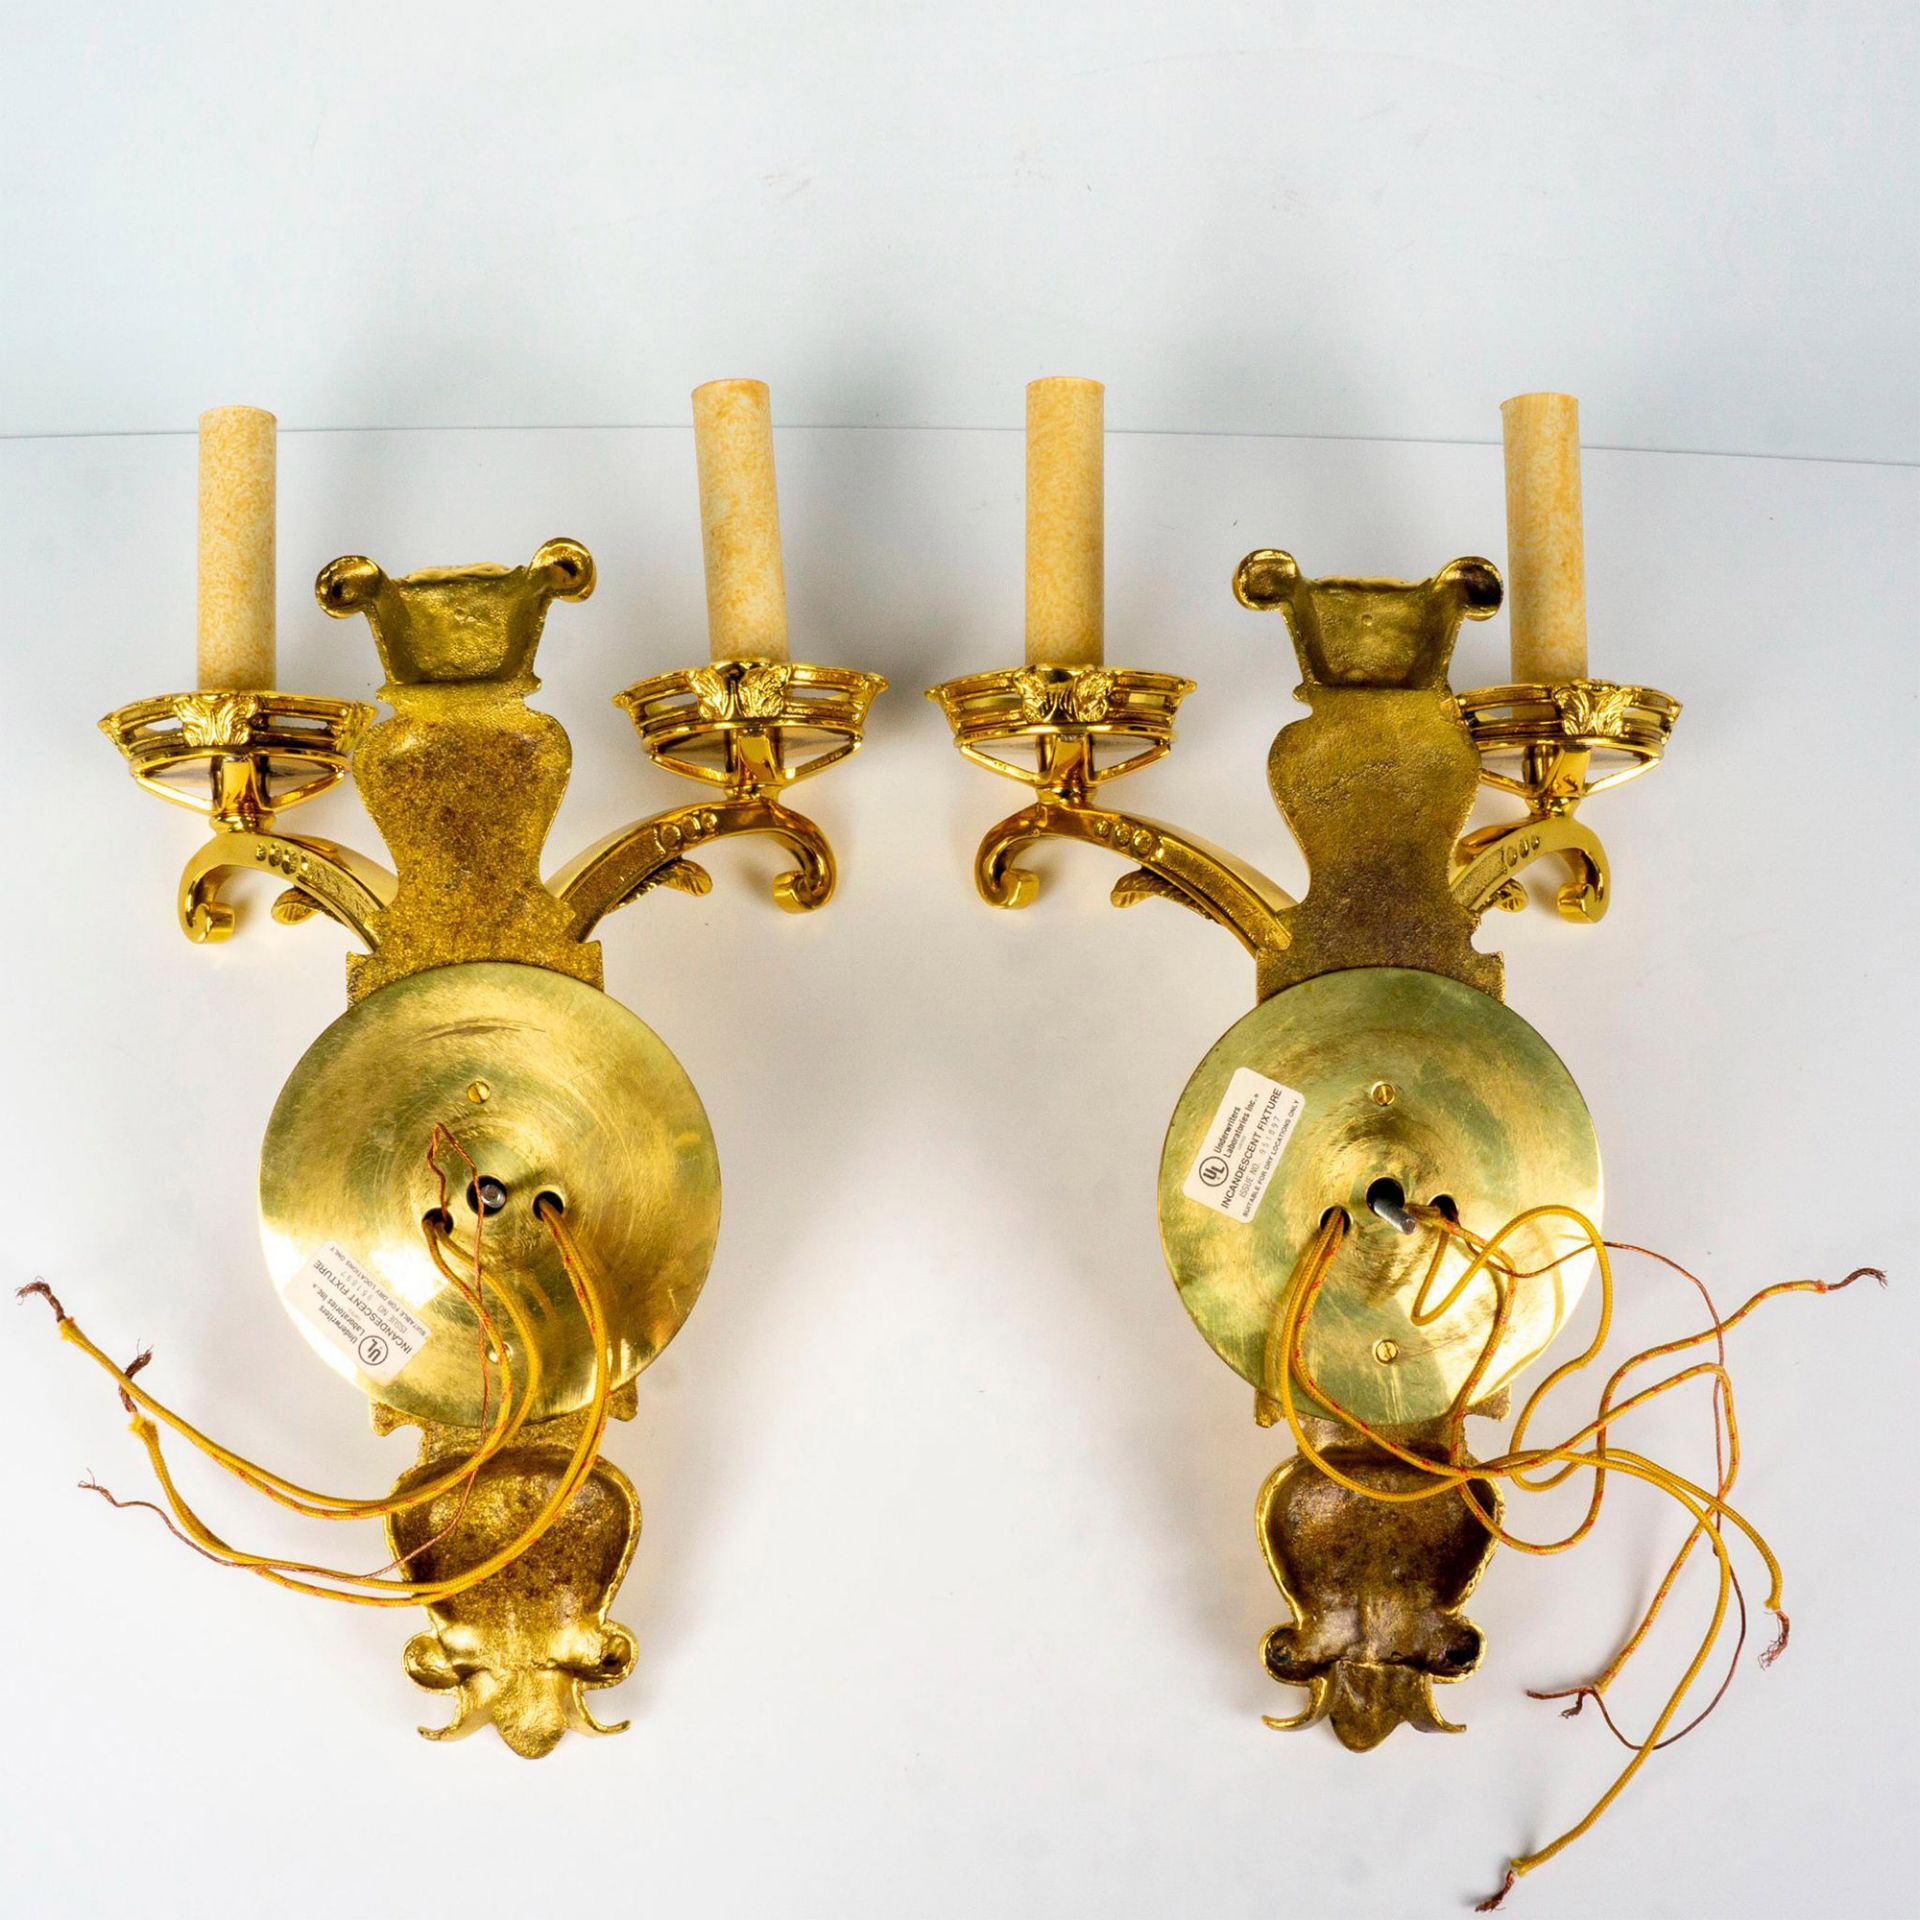 2pc Underwriters Laboratories Inc Incandescent Wall Sconces - Image 2 of 3